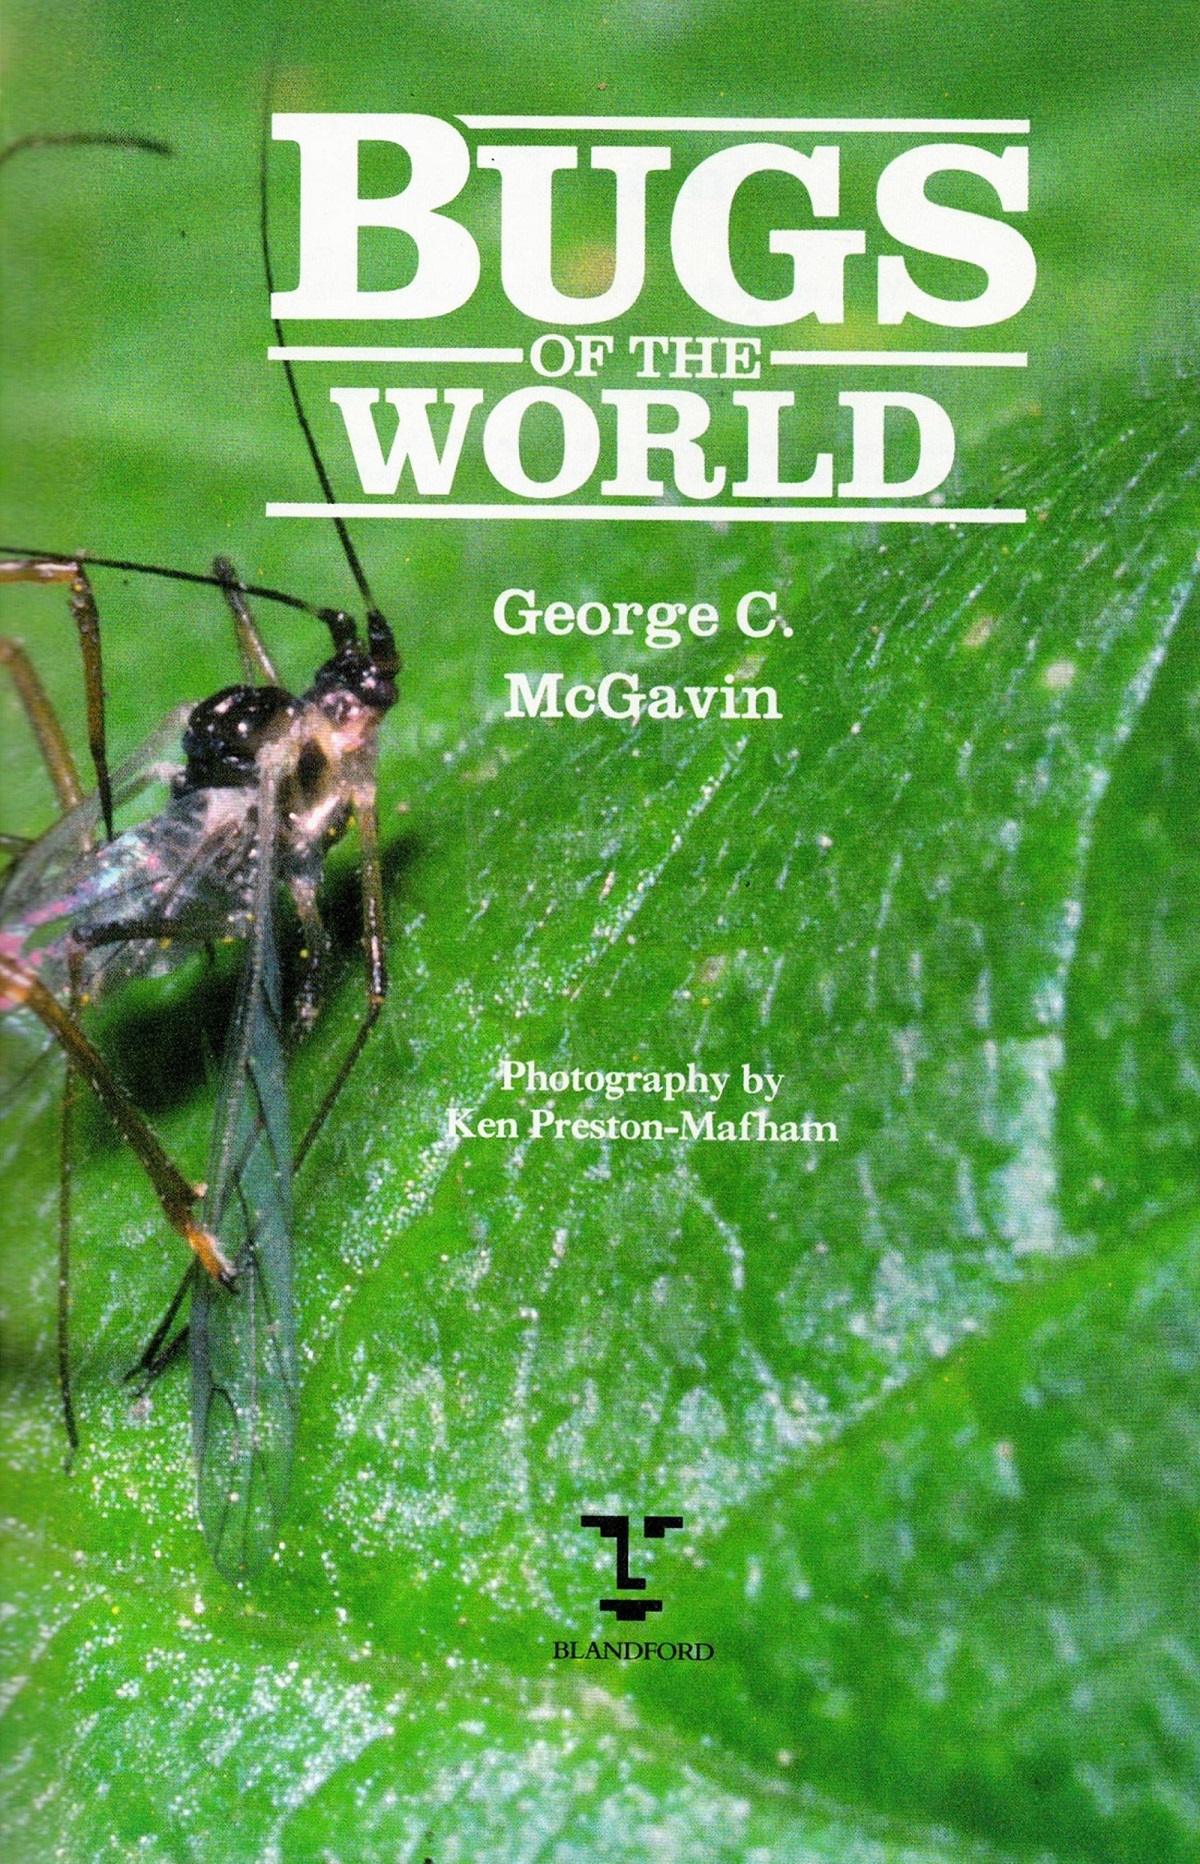 Bugs of the World by George C McGavin Hardback Book 1993 First Edition published by Blandford ( - Image 4 of 6